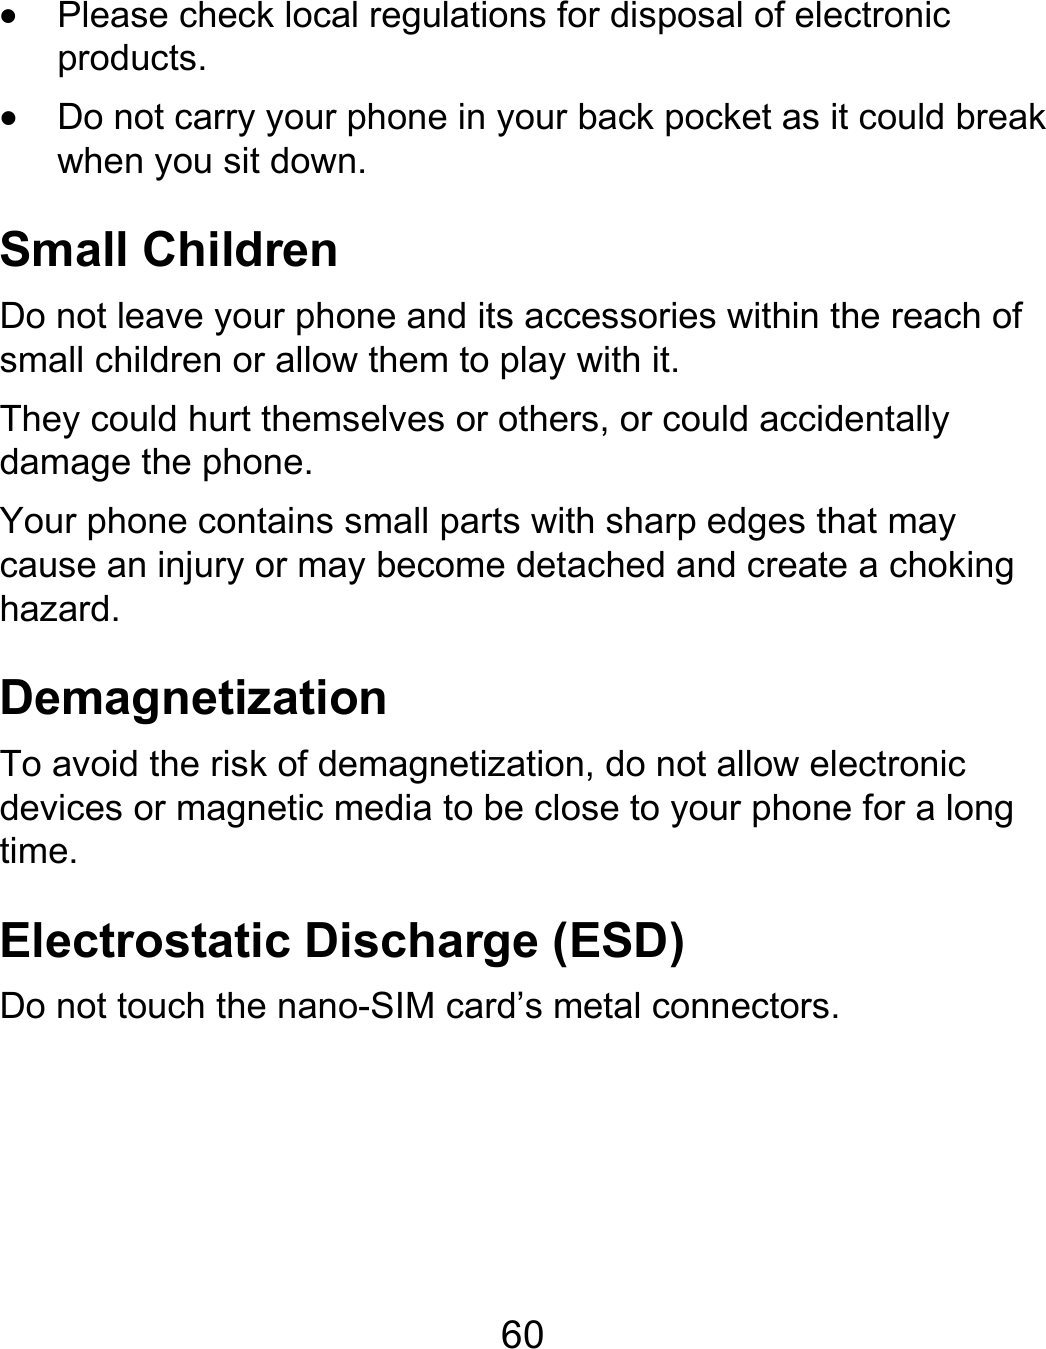  60  Please check local regulations for disposal of electronic products.  Do not carry your phone in your back pocket as it could break when you sit down. Small Children Do not leave your phone and its accessories within the reach of small children or allow them to play with it. They could hurt themselves or others, or could accidentally damage the phone. Your phone contains small parts with sharp edges that may cause an injury or may become detached and create a choking hazard. Demagnetization To avoid the risk of demagnetization, do not allow electronic devices or magnetic media to be close to your phone for a long time. Electrostatic Discharge (ESD) Do not touch the nano-SIM card’s metal connectors.   